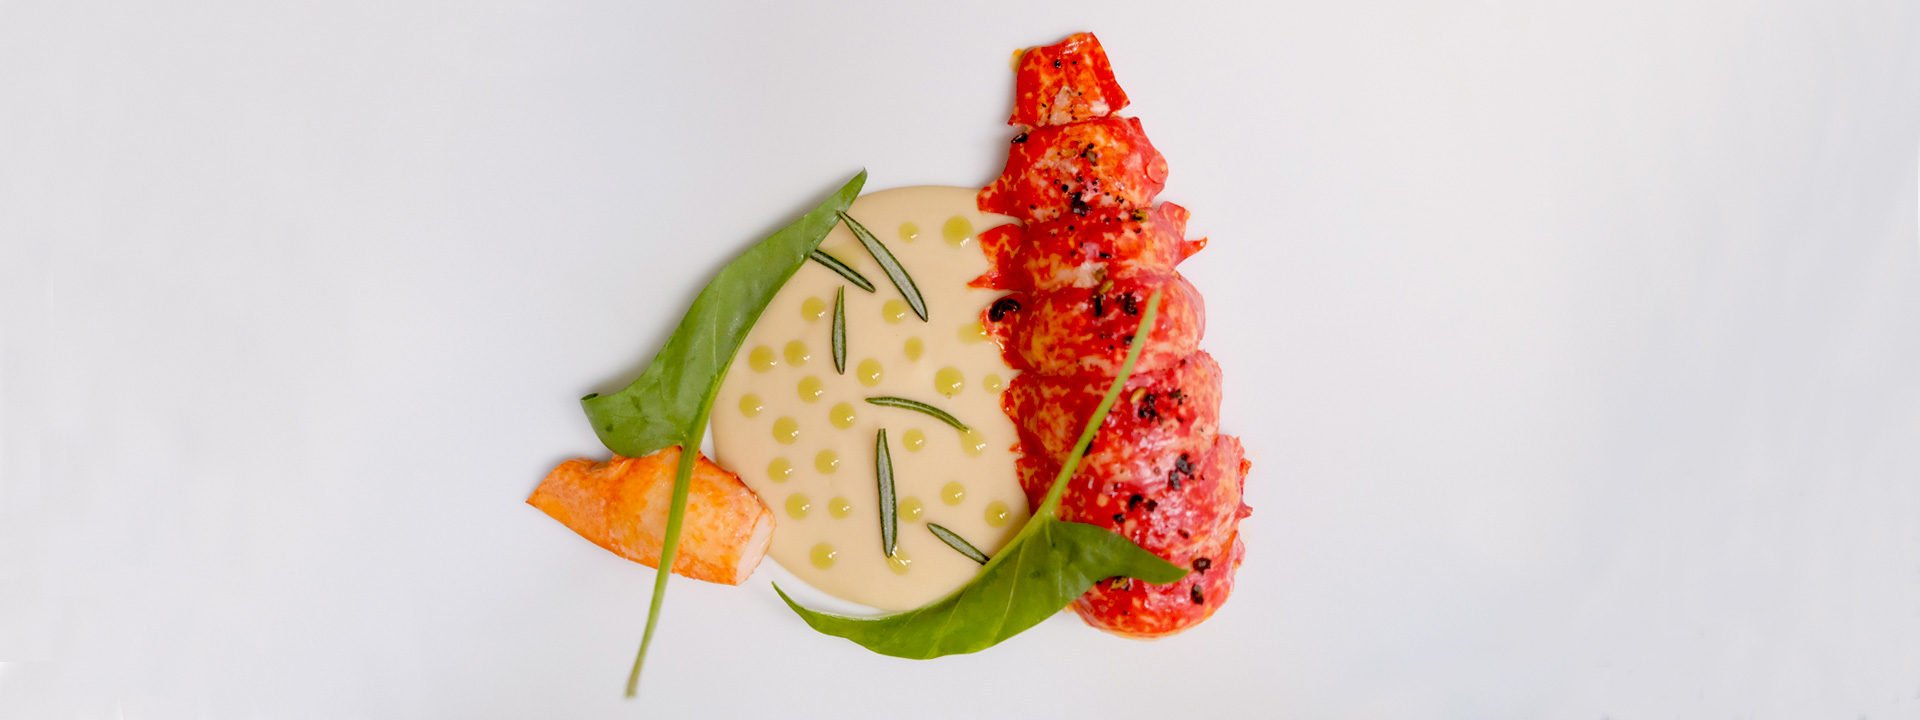 
Lobster in tiny pieces with a sauce of yellow tones presented in an exquisite way.